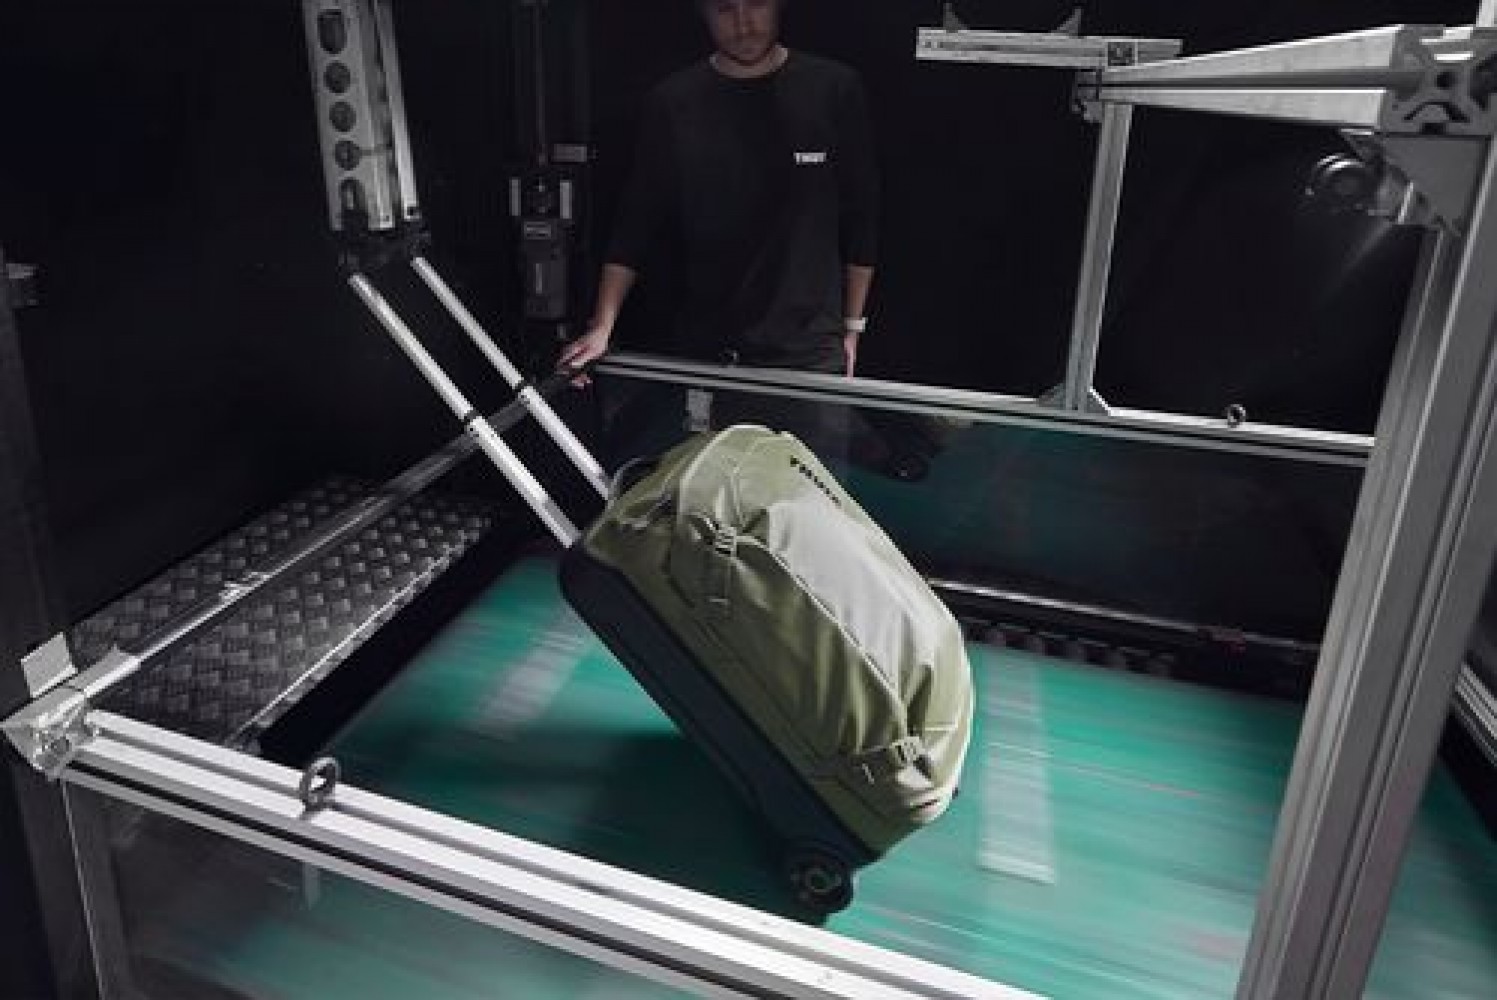 A Thule suitcase is being tested in the Thule test center durability test.